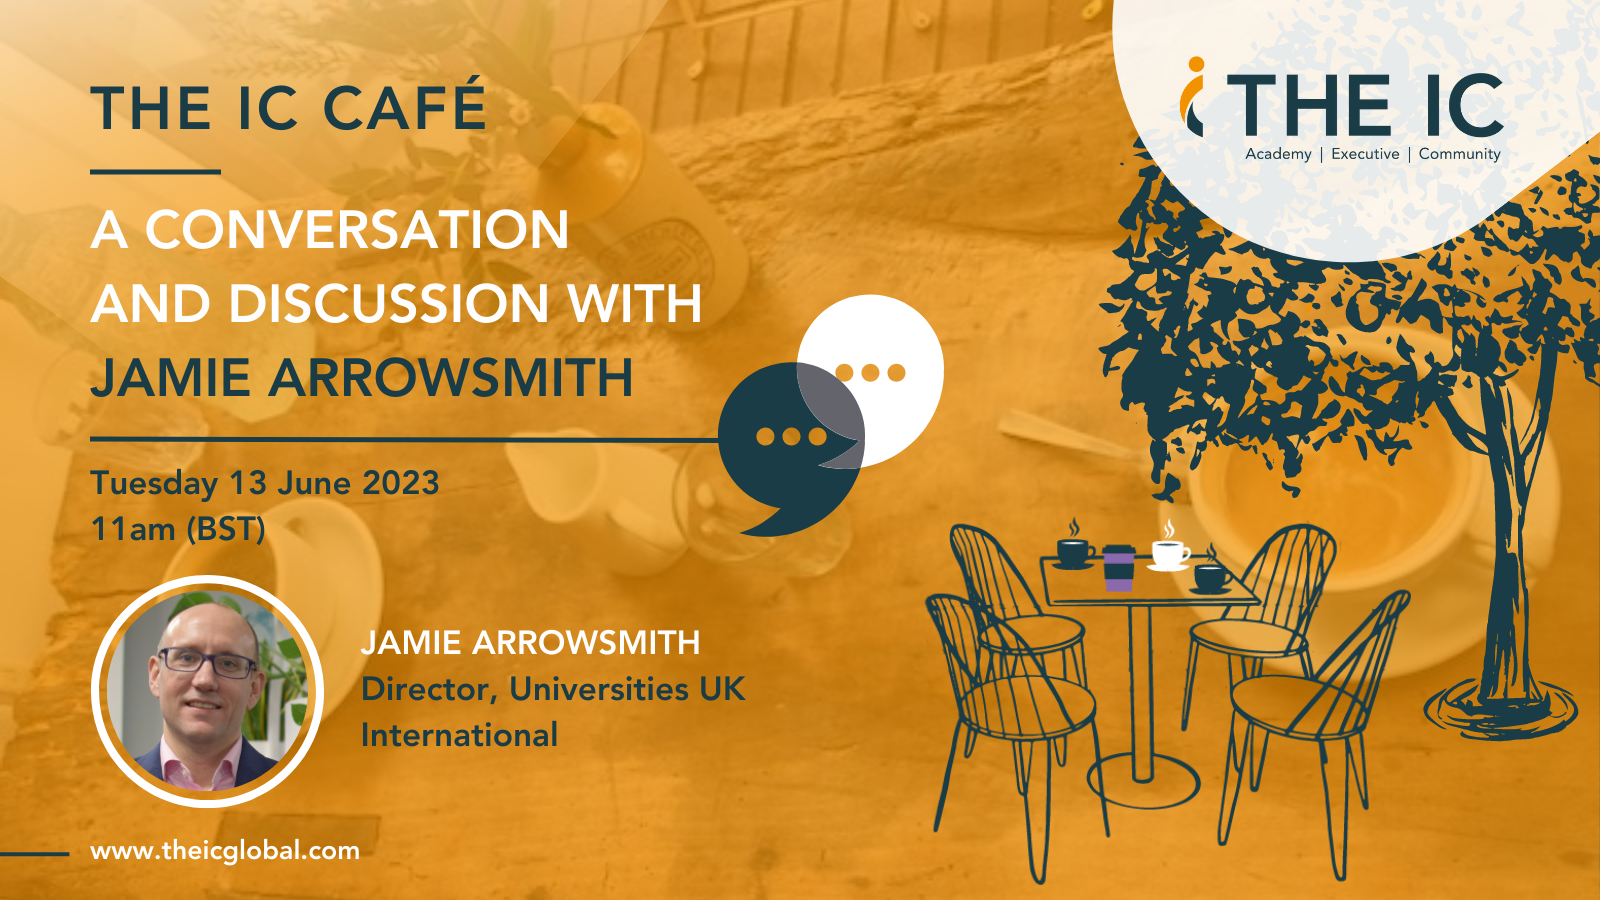 The IC Café ‘A conversation and discussion with Jamie Arrowsmith’